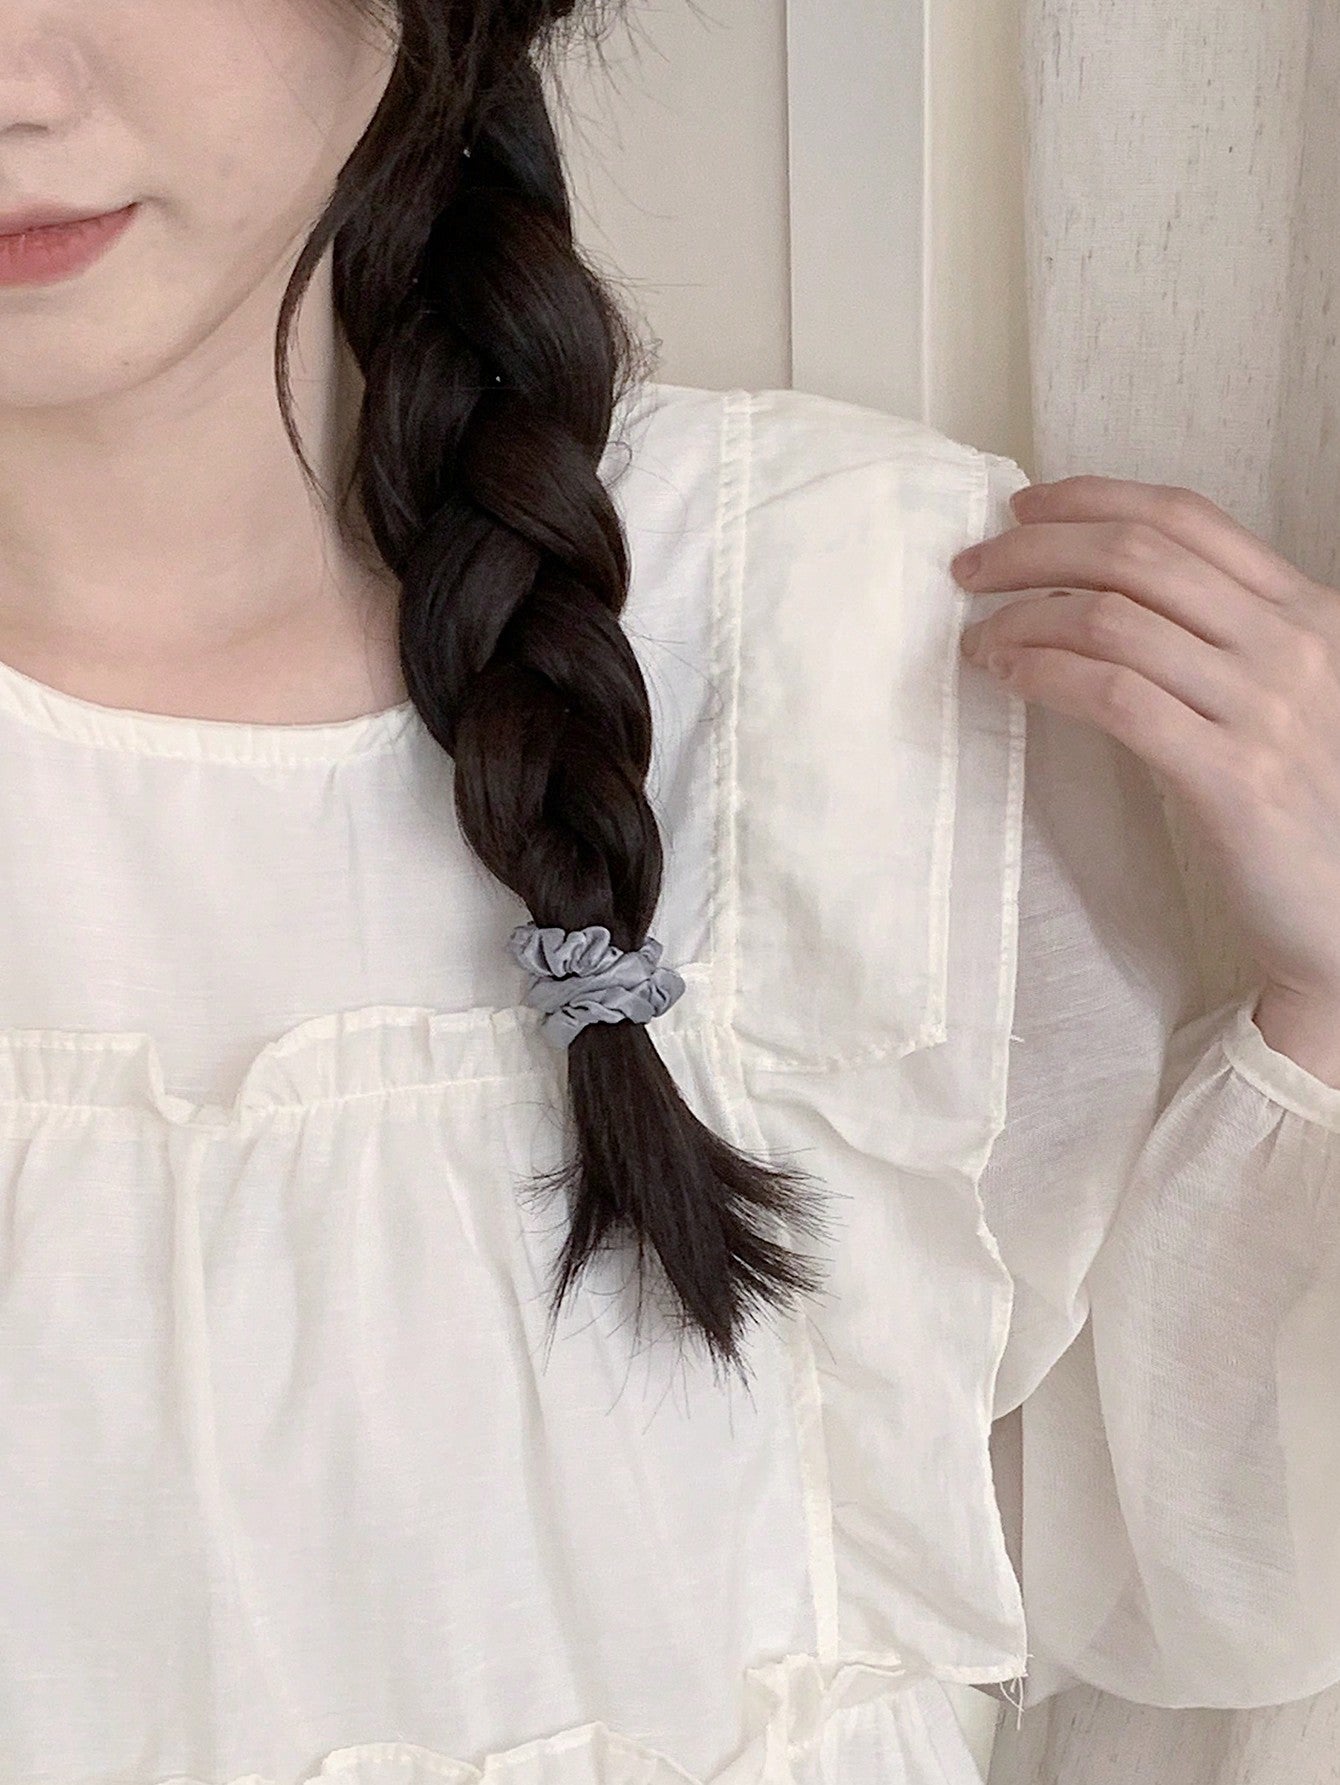 Wood Ear-Edged Large Intestine Hair Ties Is Suitable For Daily Use, Simple And Convenient